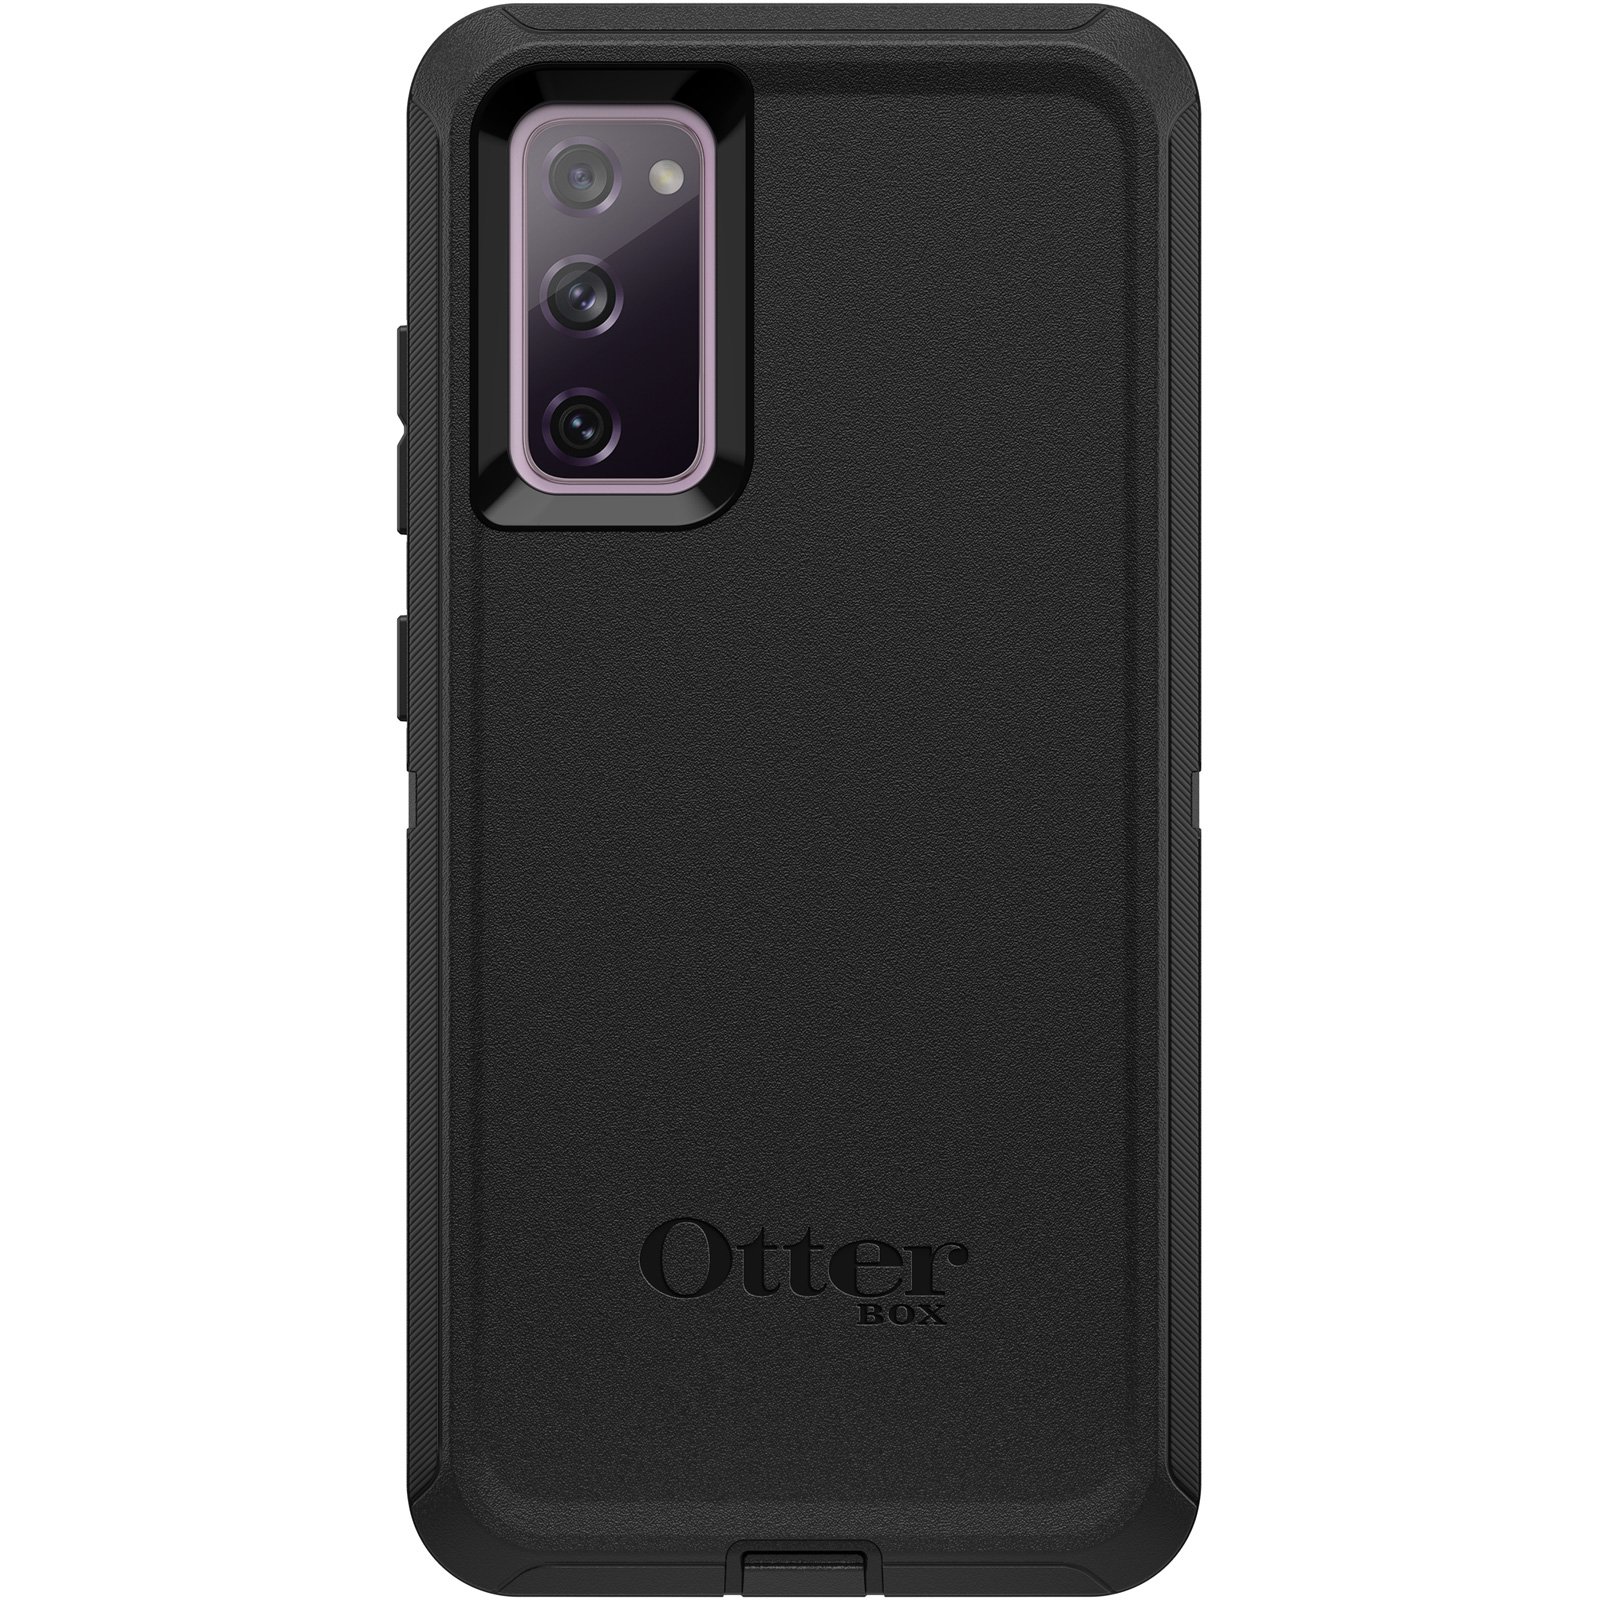 OtterBox Defender Series Case for Samsung Galaxy S20 Fe 5G, BLACK.